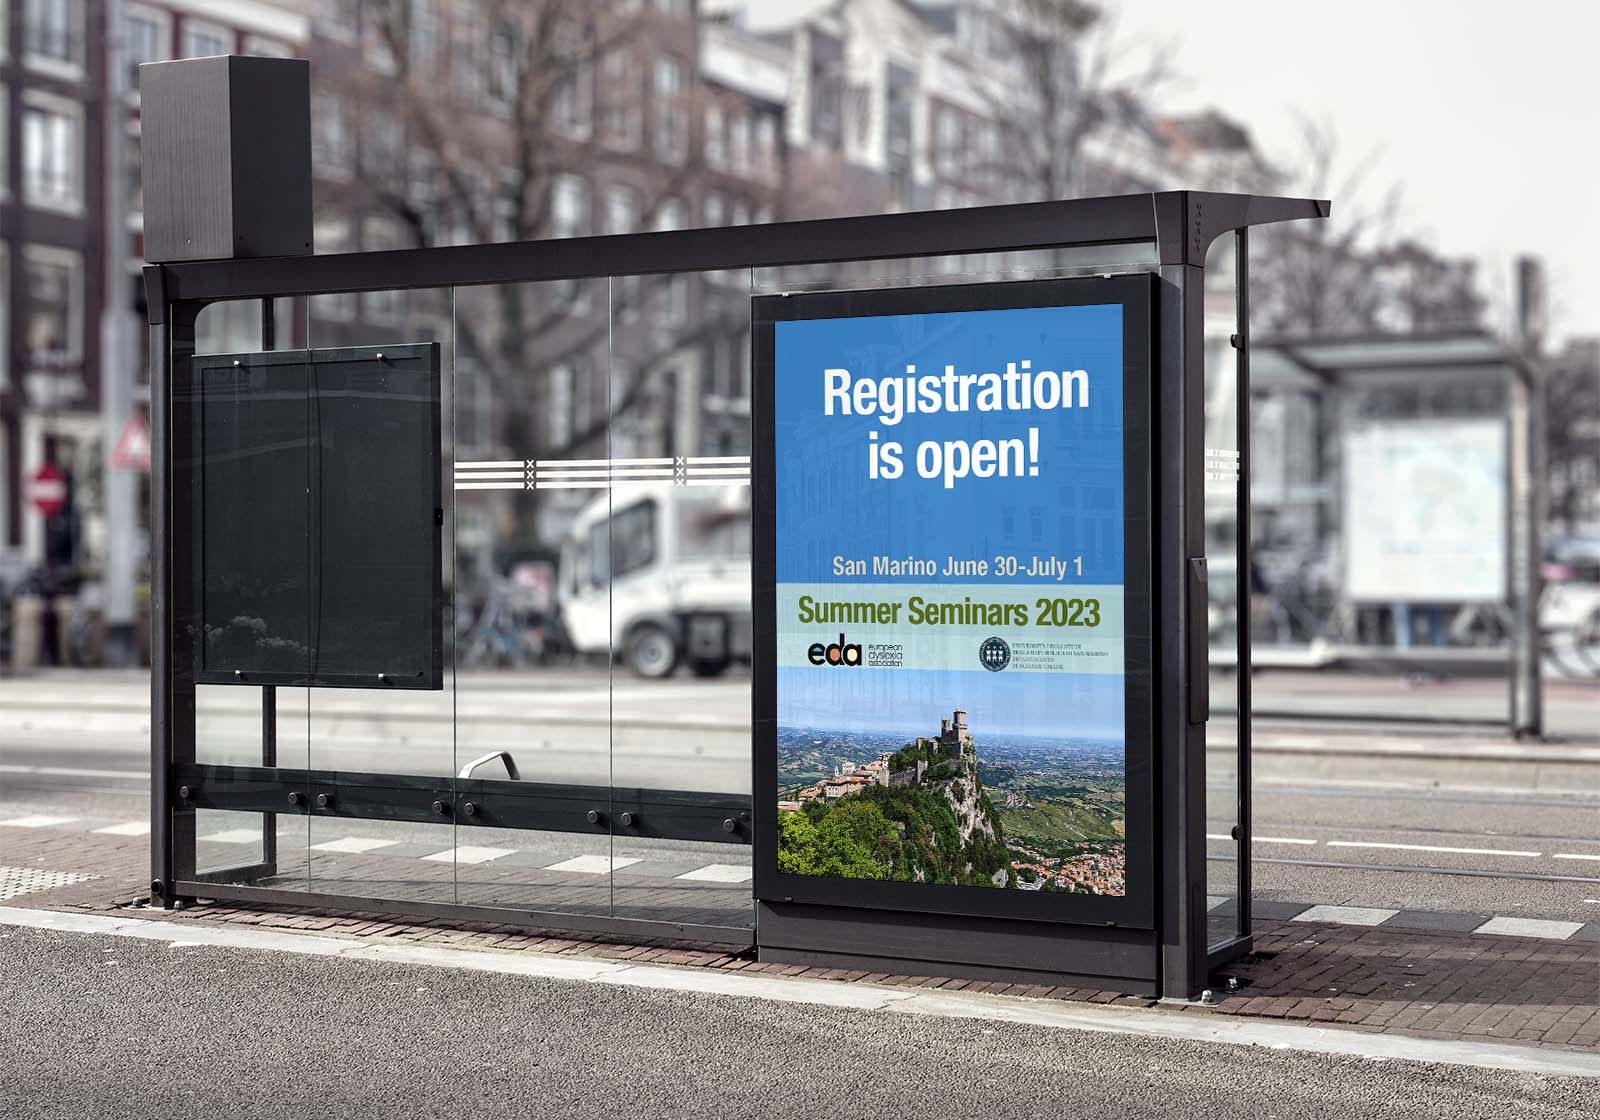 Picture of a bus stop with the registration sign